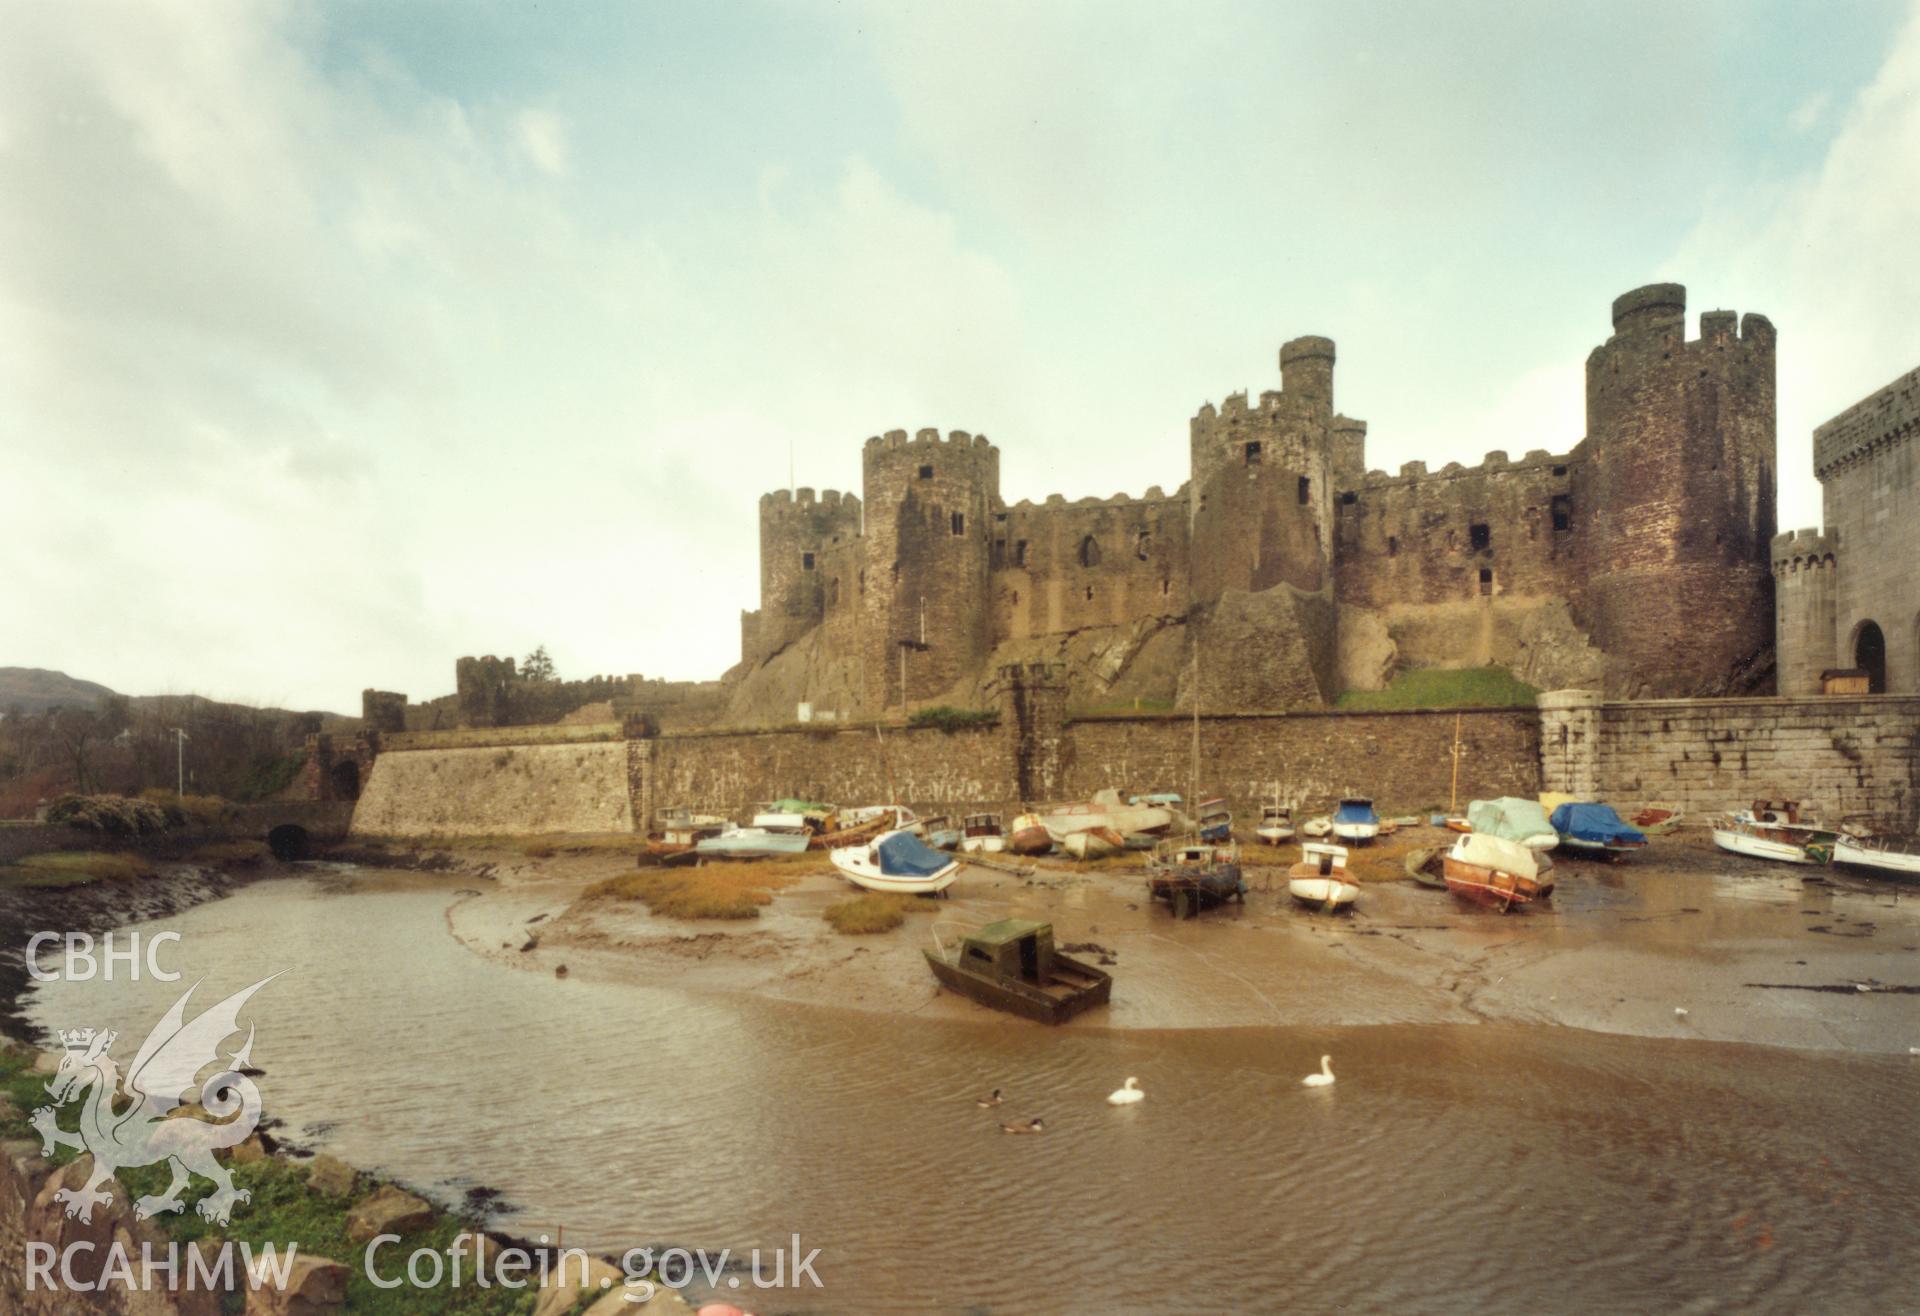 1 of a set of 27 colour prints: print showing view of Conwy castle and boats, collated by the former Central Office of Information.